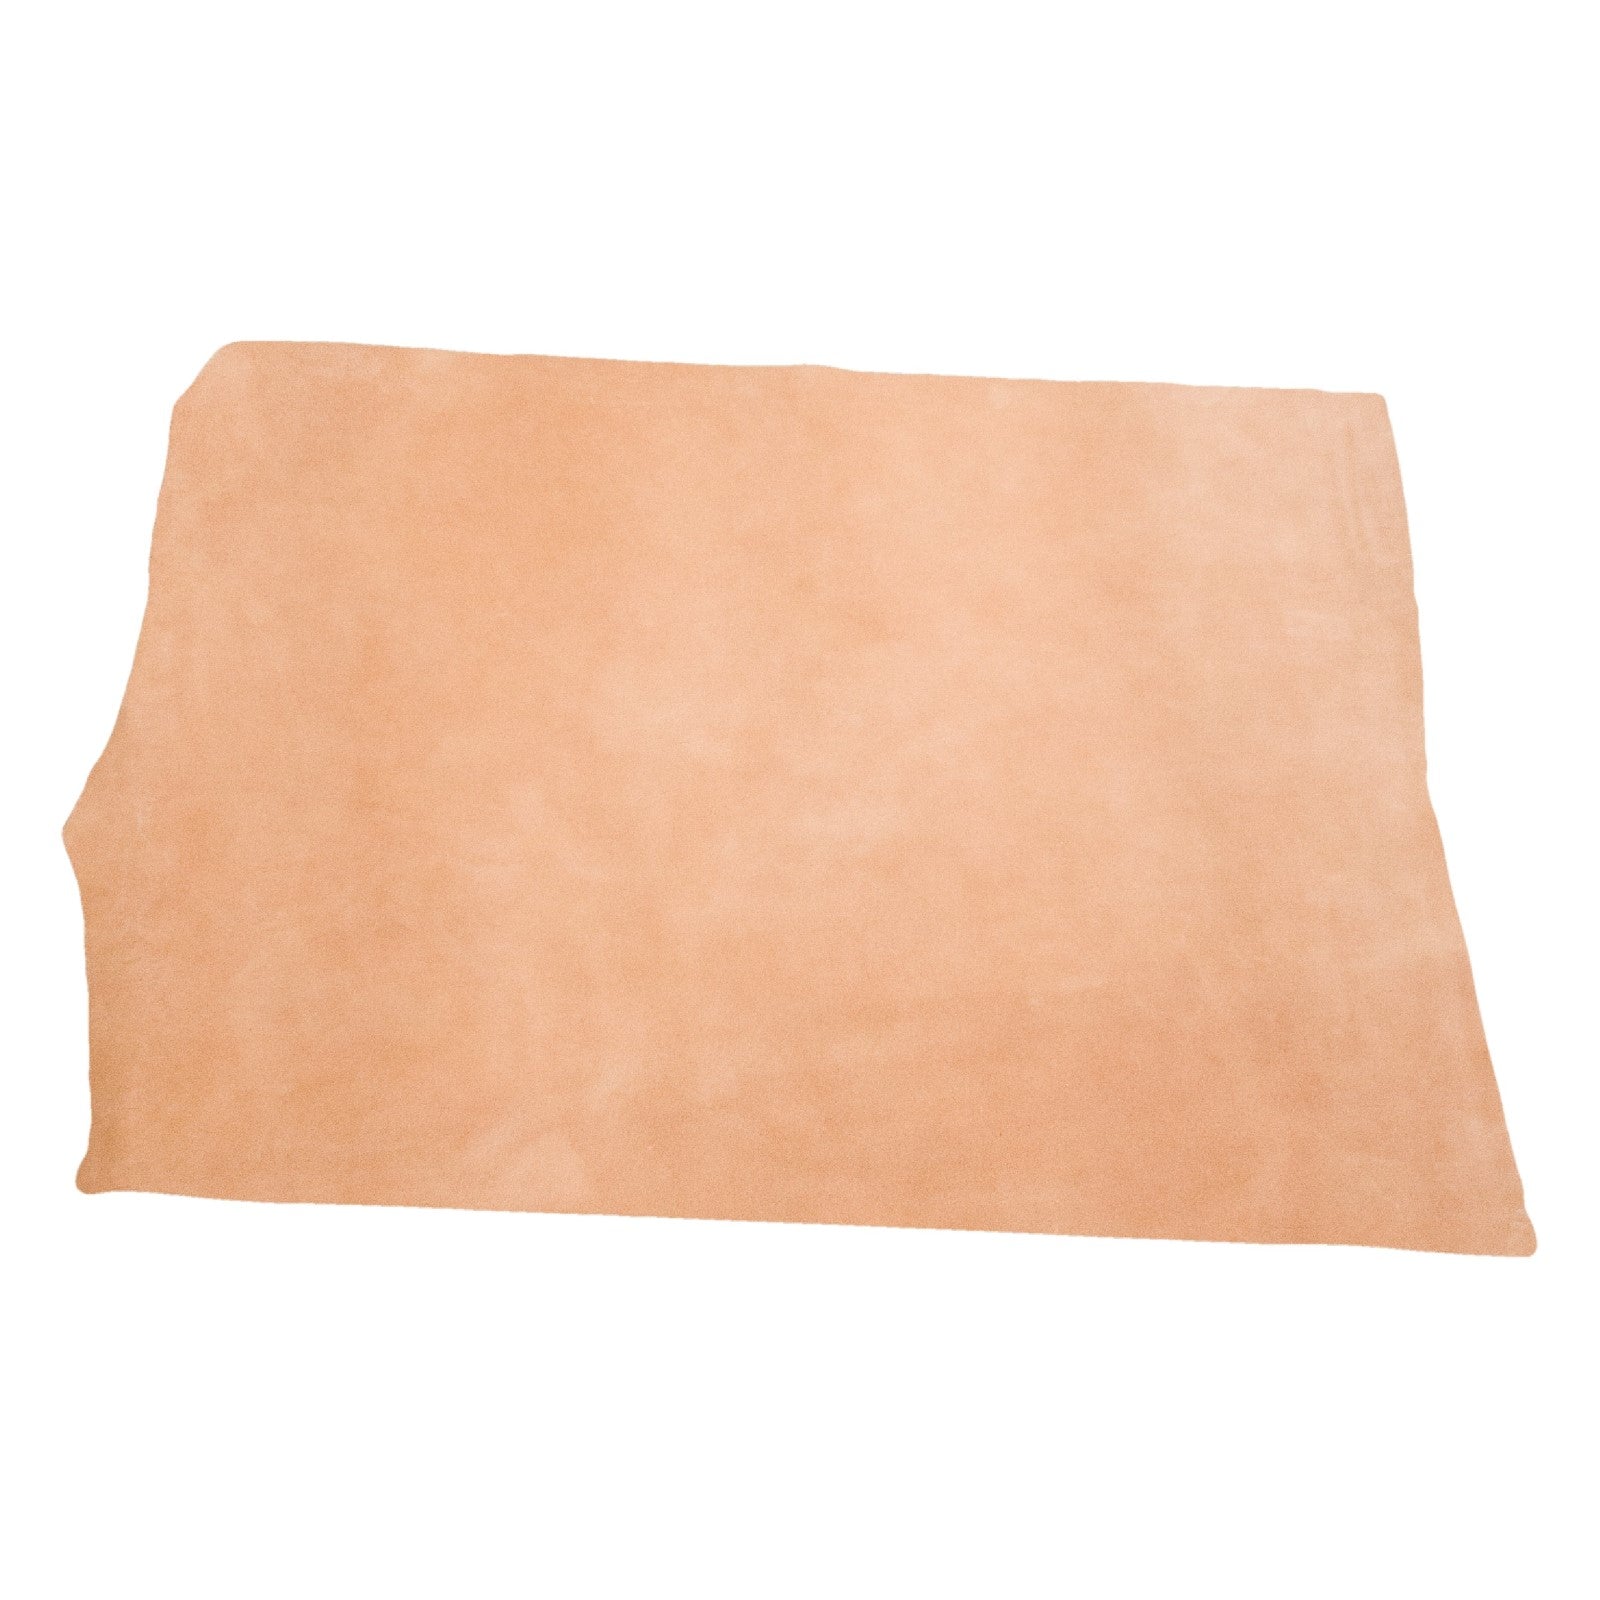 Austin (Dusty Rose), SB Foot, Non-stock, 5-6oz, Oil Tanned Hides, Middle Piece / 6.5 - 7.5 Sq Ft | The Leather Guy